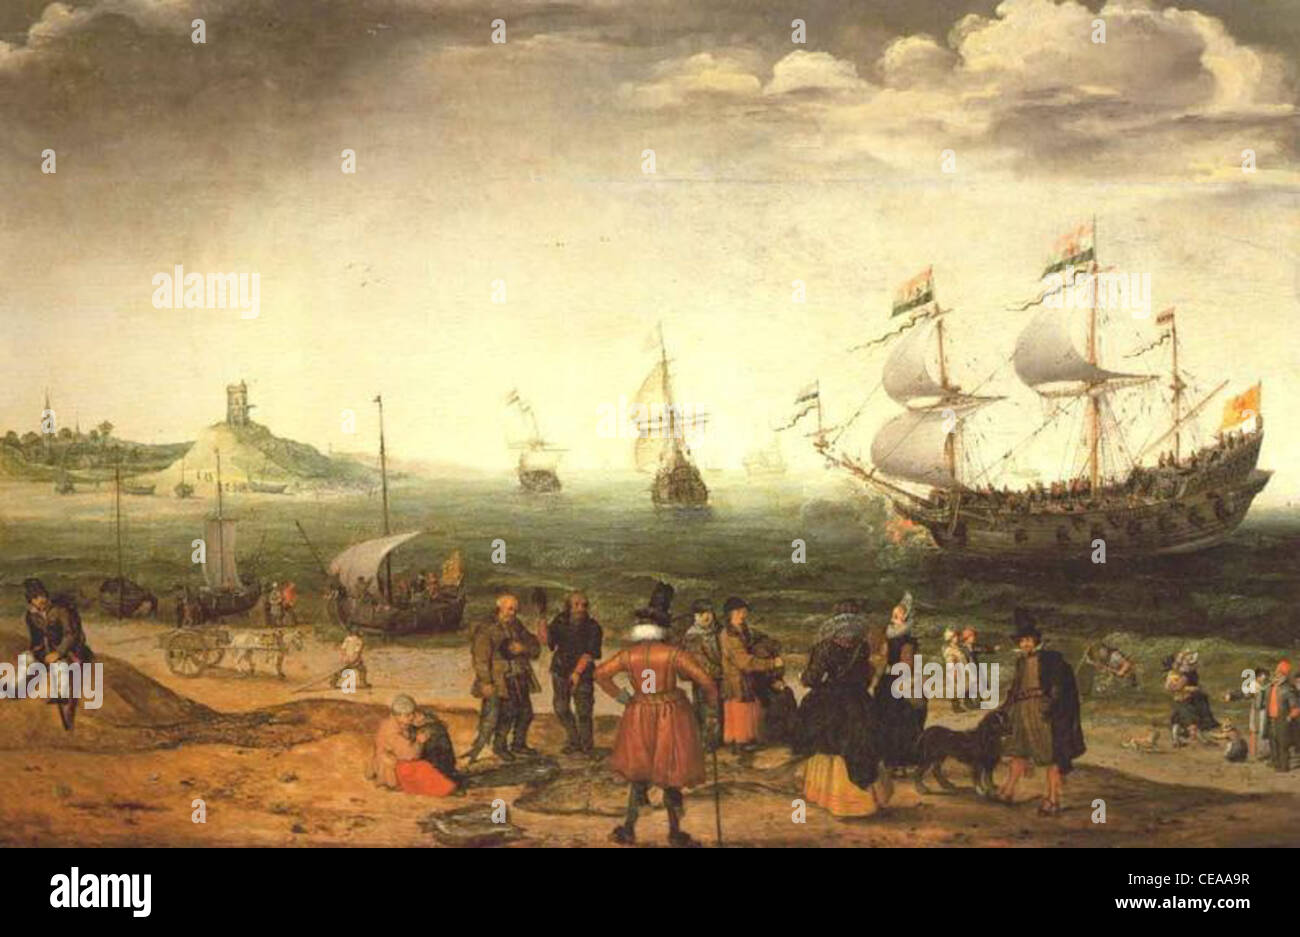 The painting Coastal Landscape with Ships by the Dutch painter Adam Willaerts (1577-1664). Oil on canvas, Collection of the Prince of Lichtenstein, Vaduz, year 1616. Stock Photo